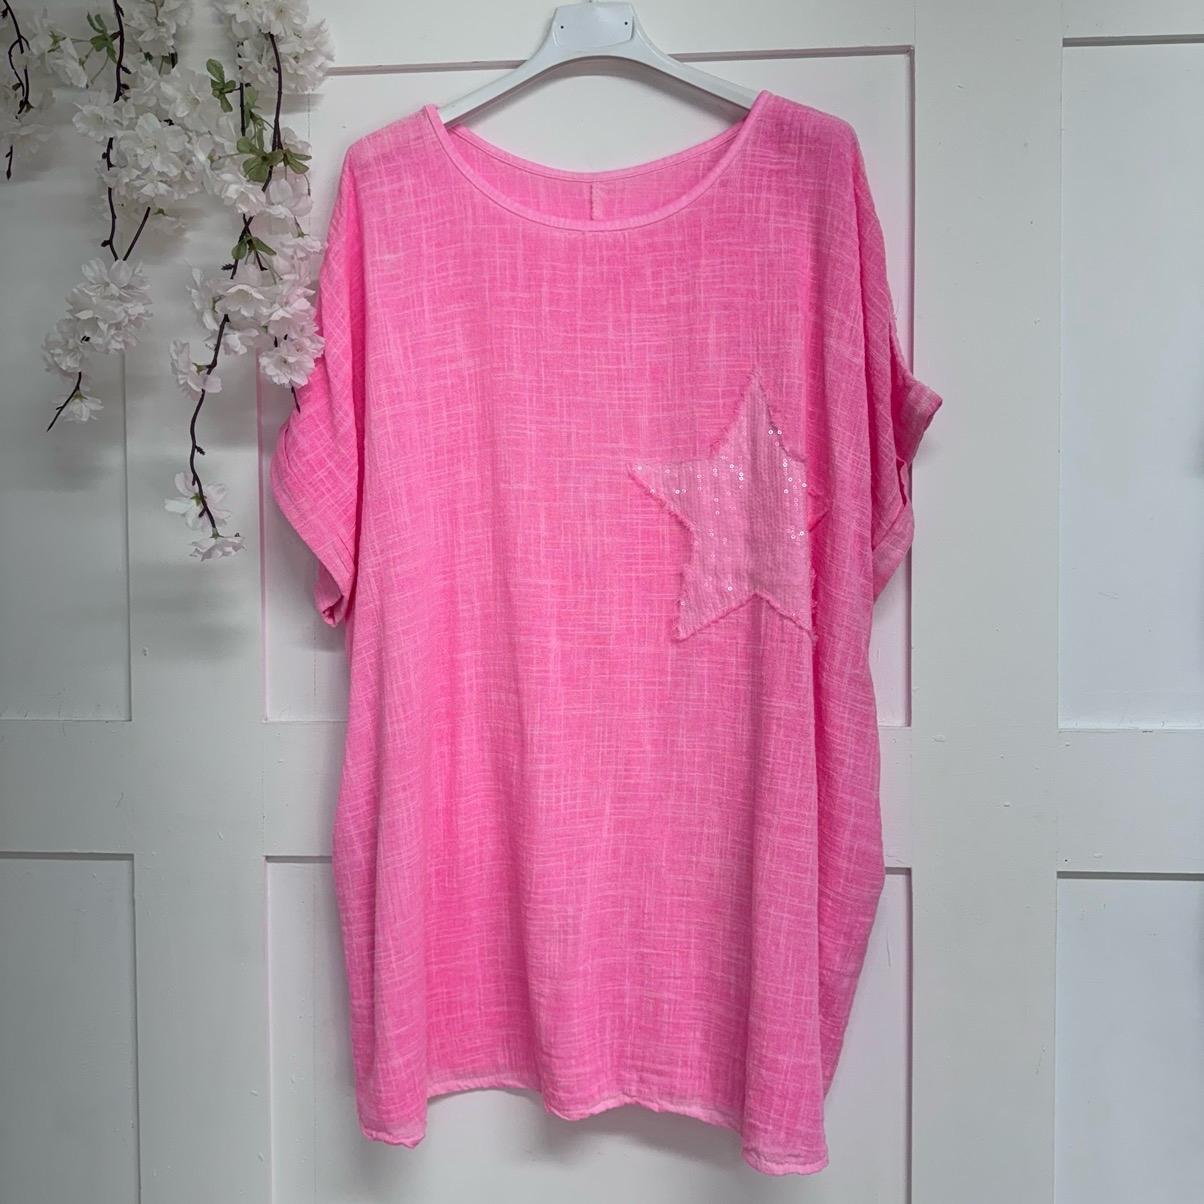 Nina: Cotton sequin star top with pockets. One Size 14-22